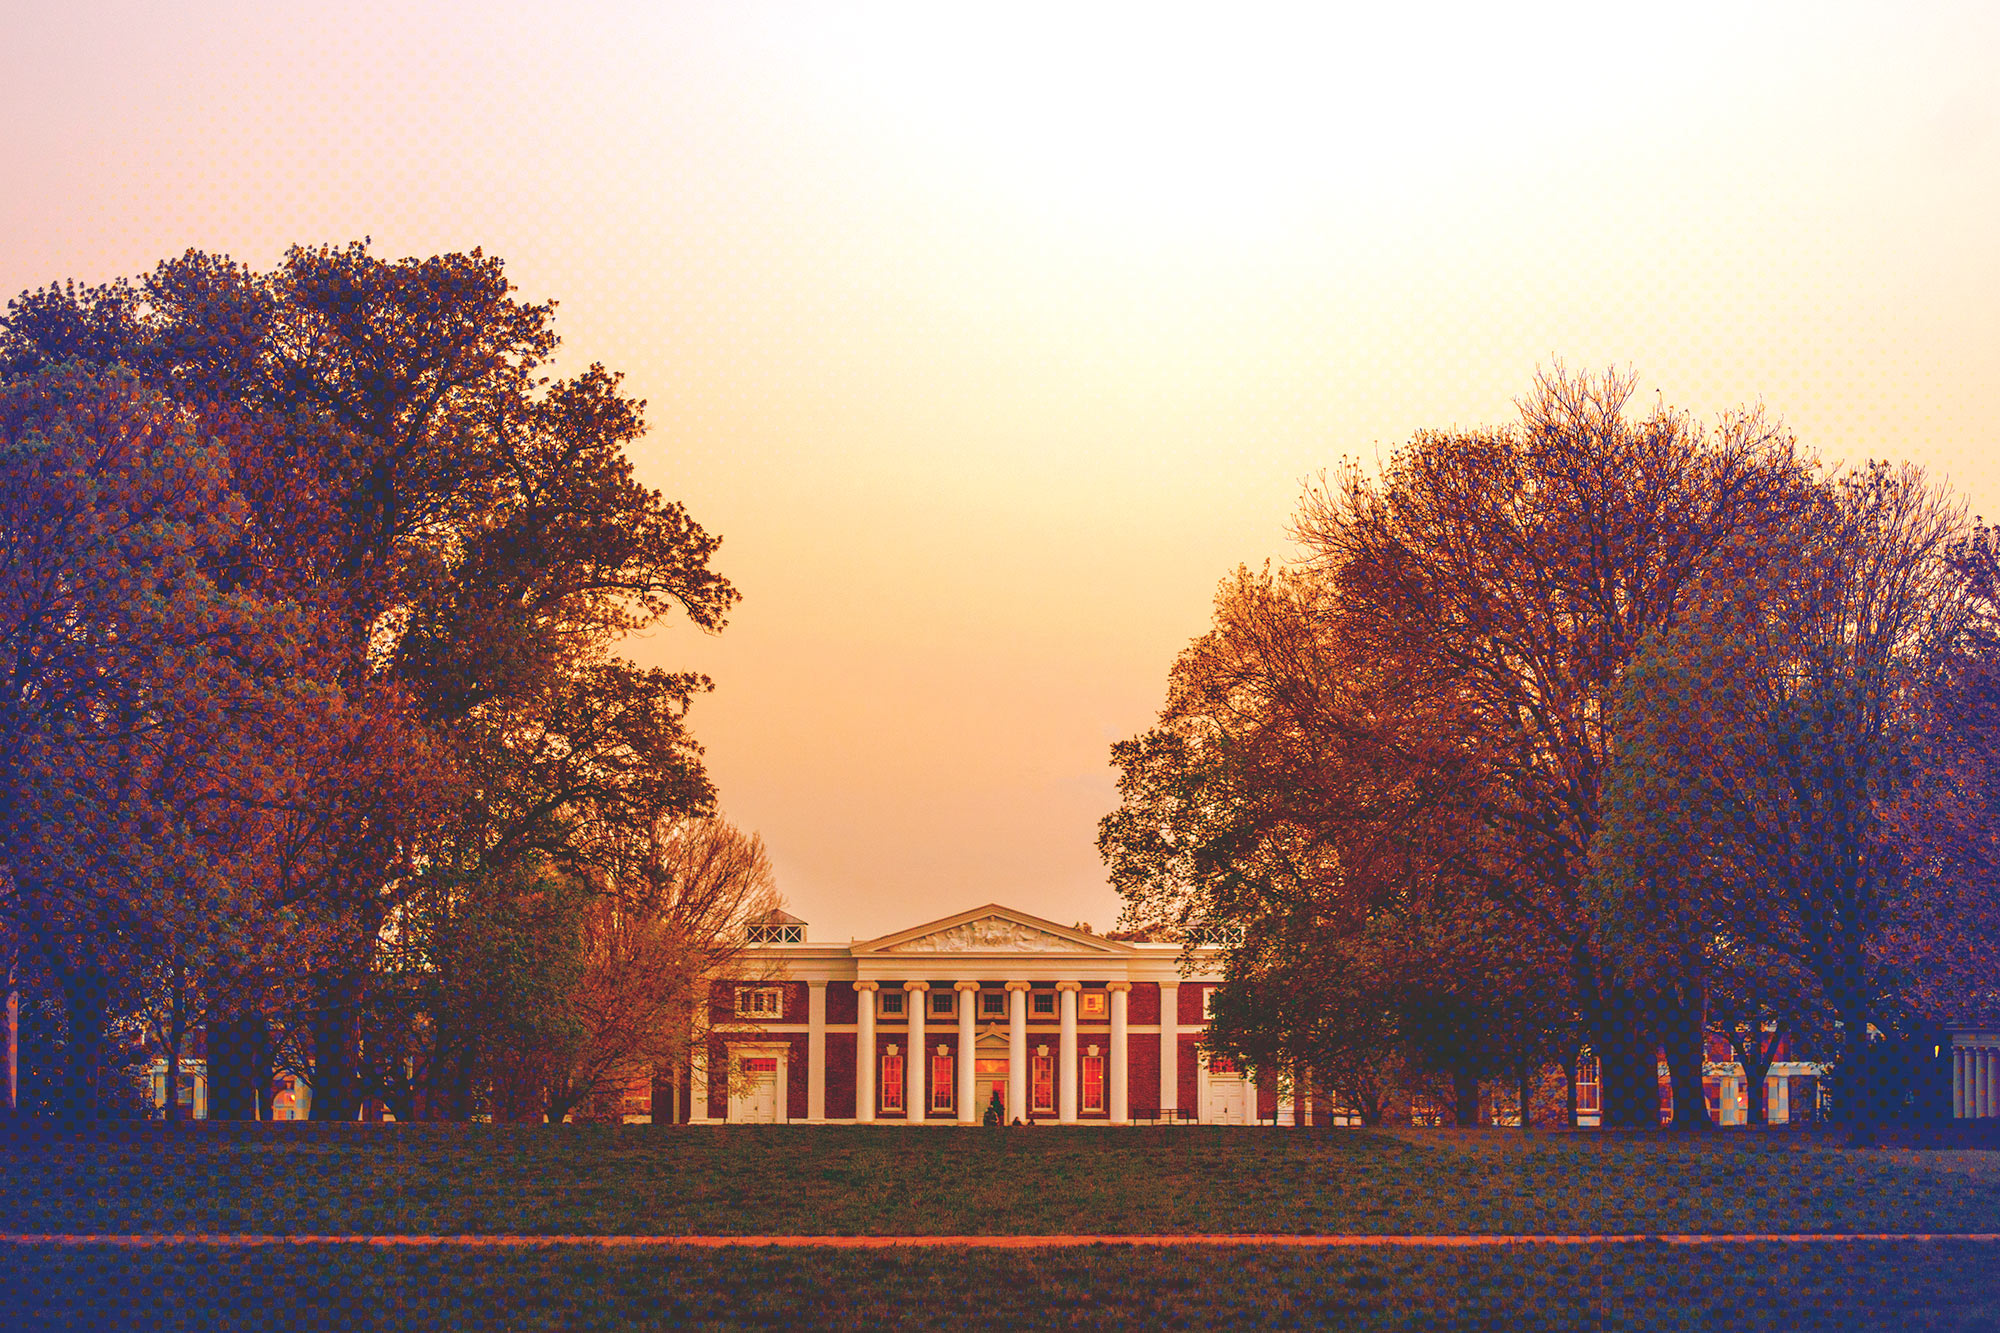 Building on grounds at sunset